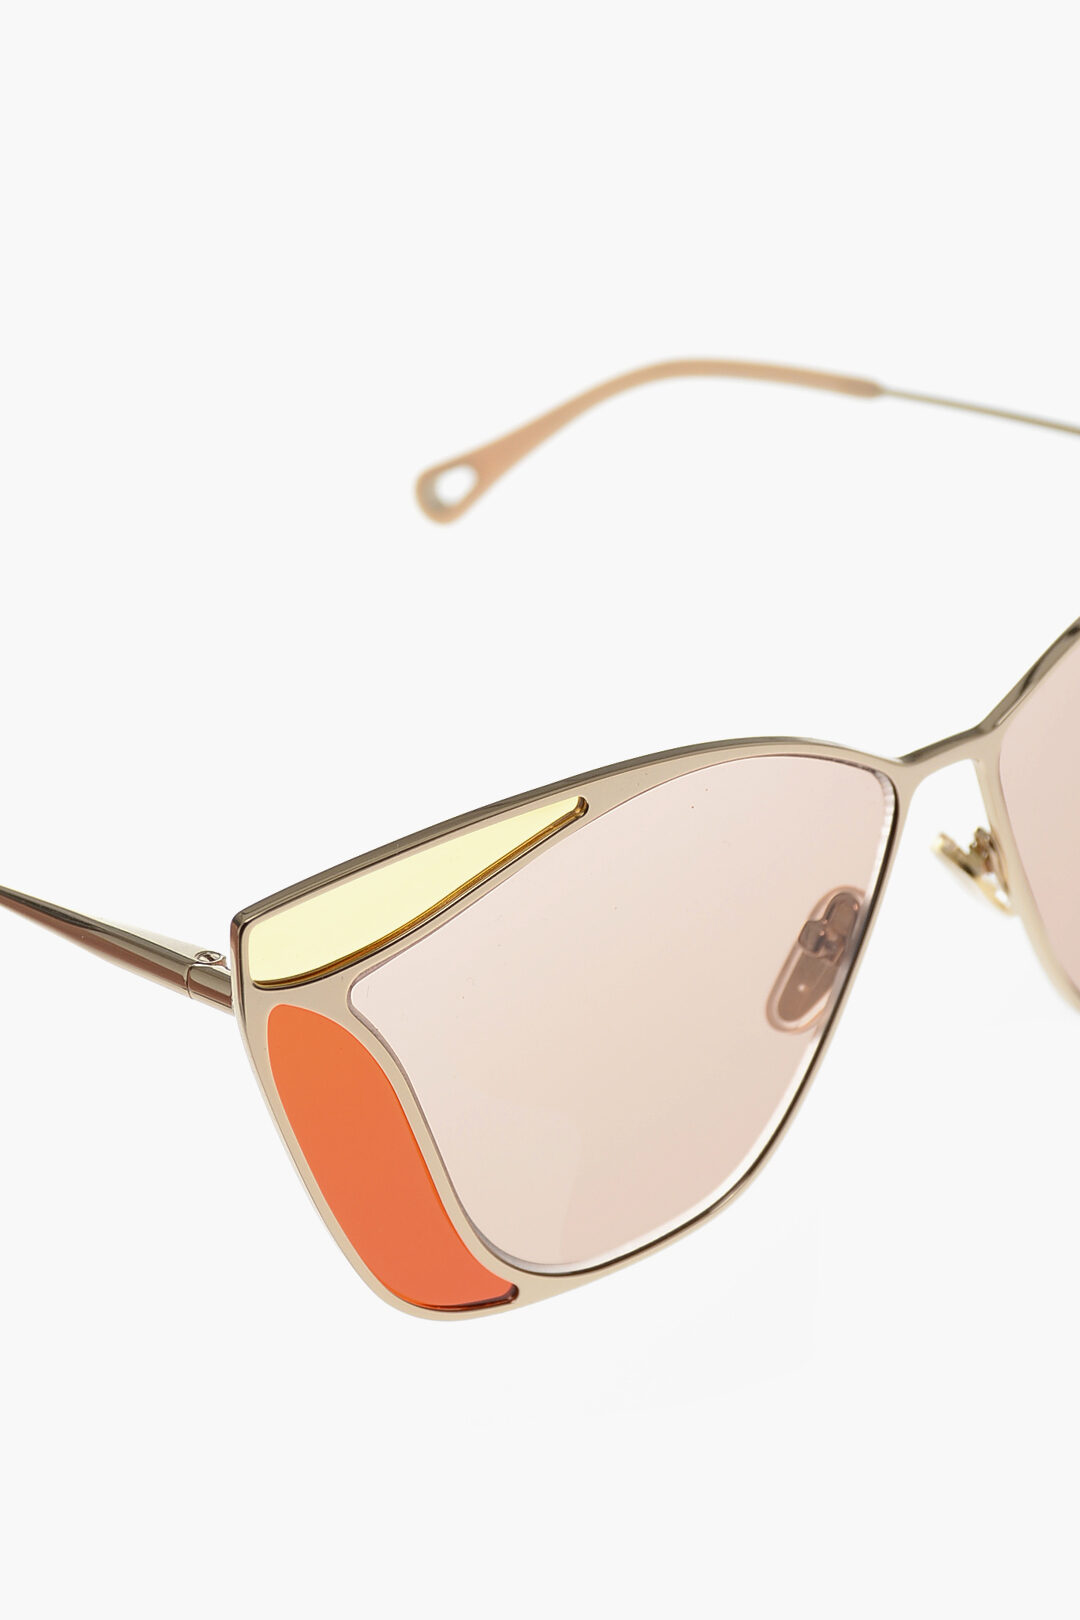 Chloe Metal Frame GEMMA Sunglasses with Contrasting Details women - Glamood  Outlet